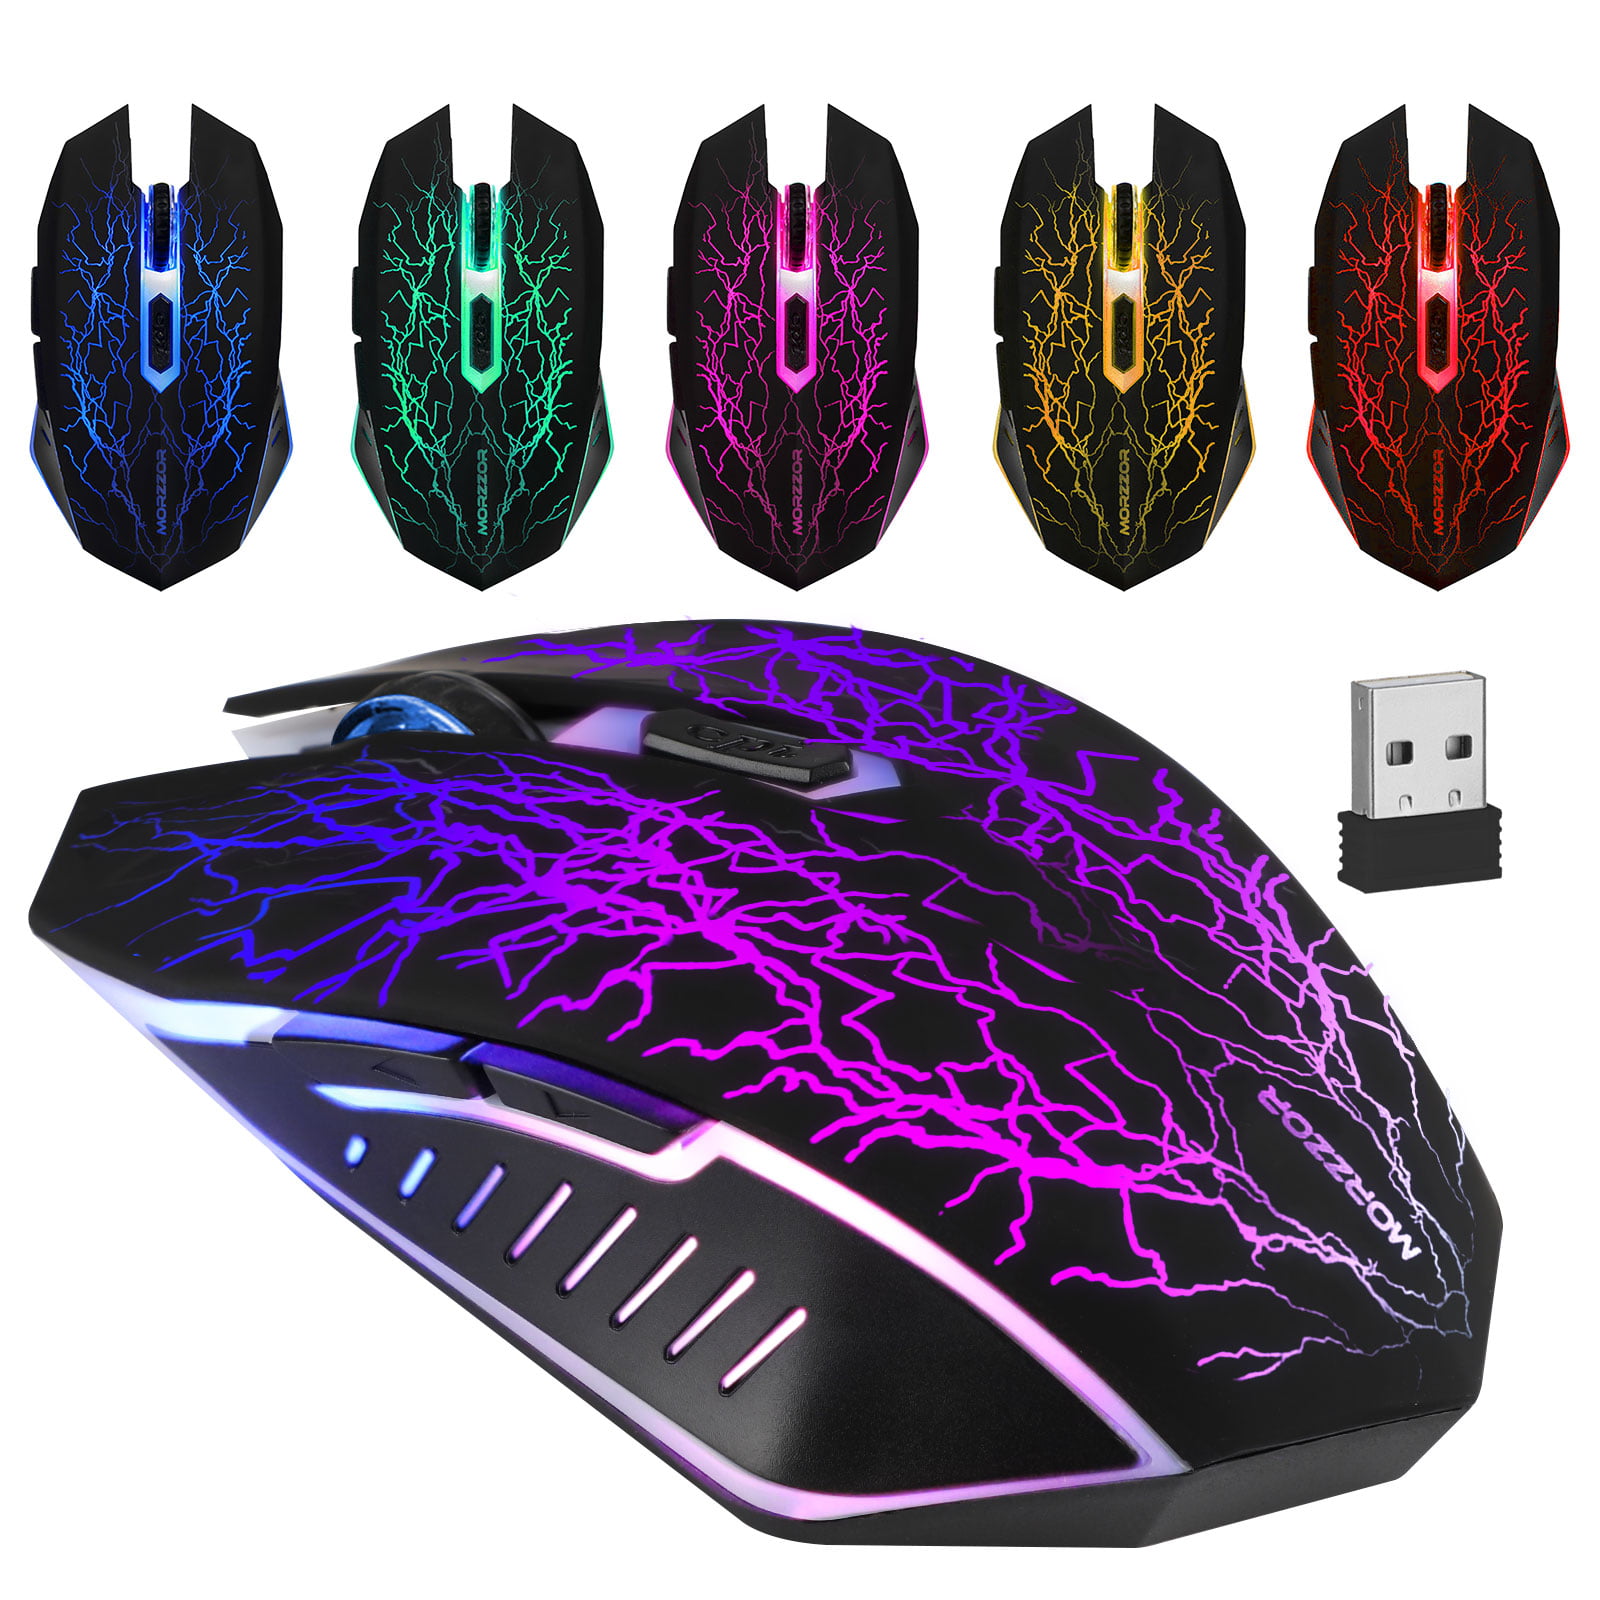 Silent Click 6 Buttons Wired Gaming Mouse Usb Mute Led Optical Cable Ergonomic 